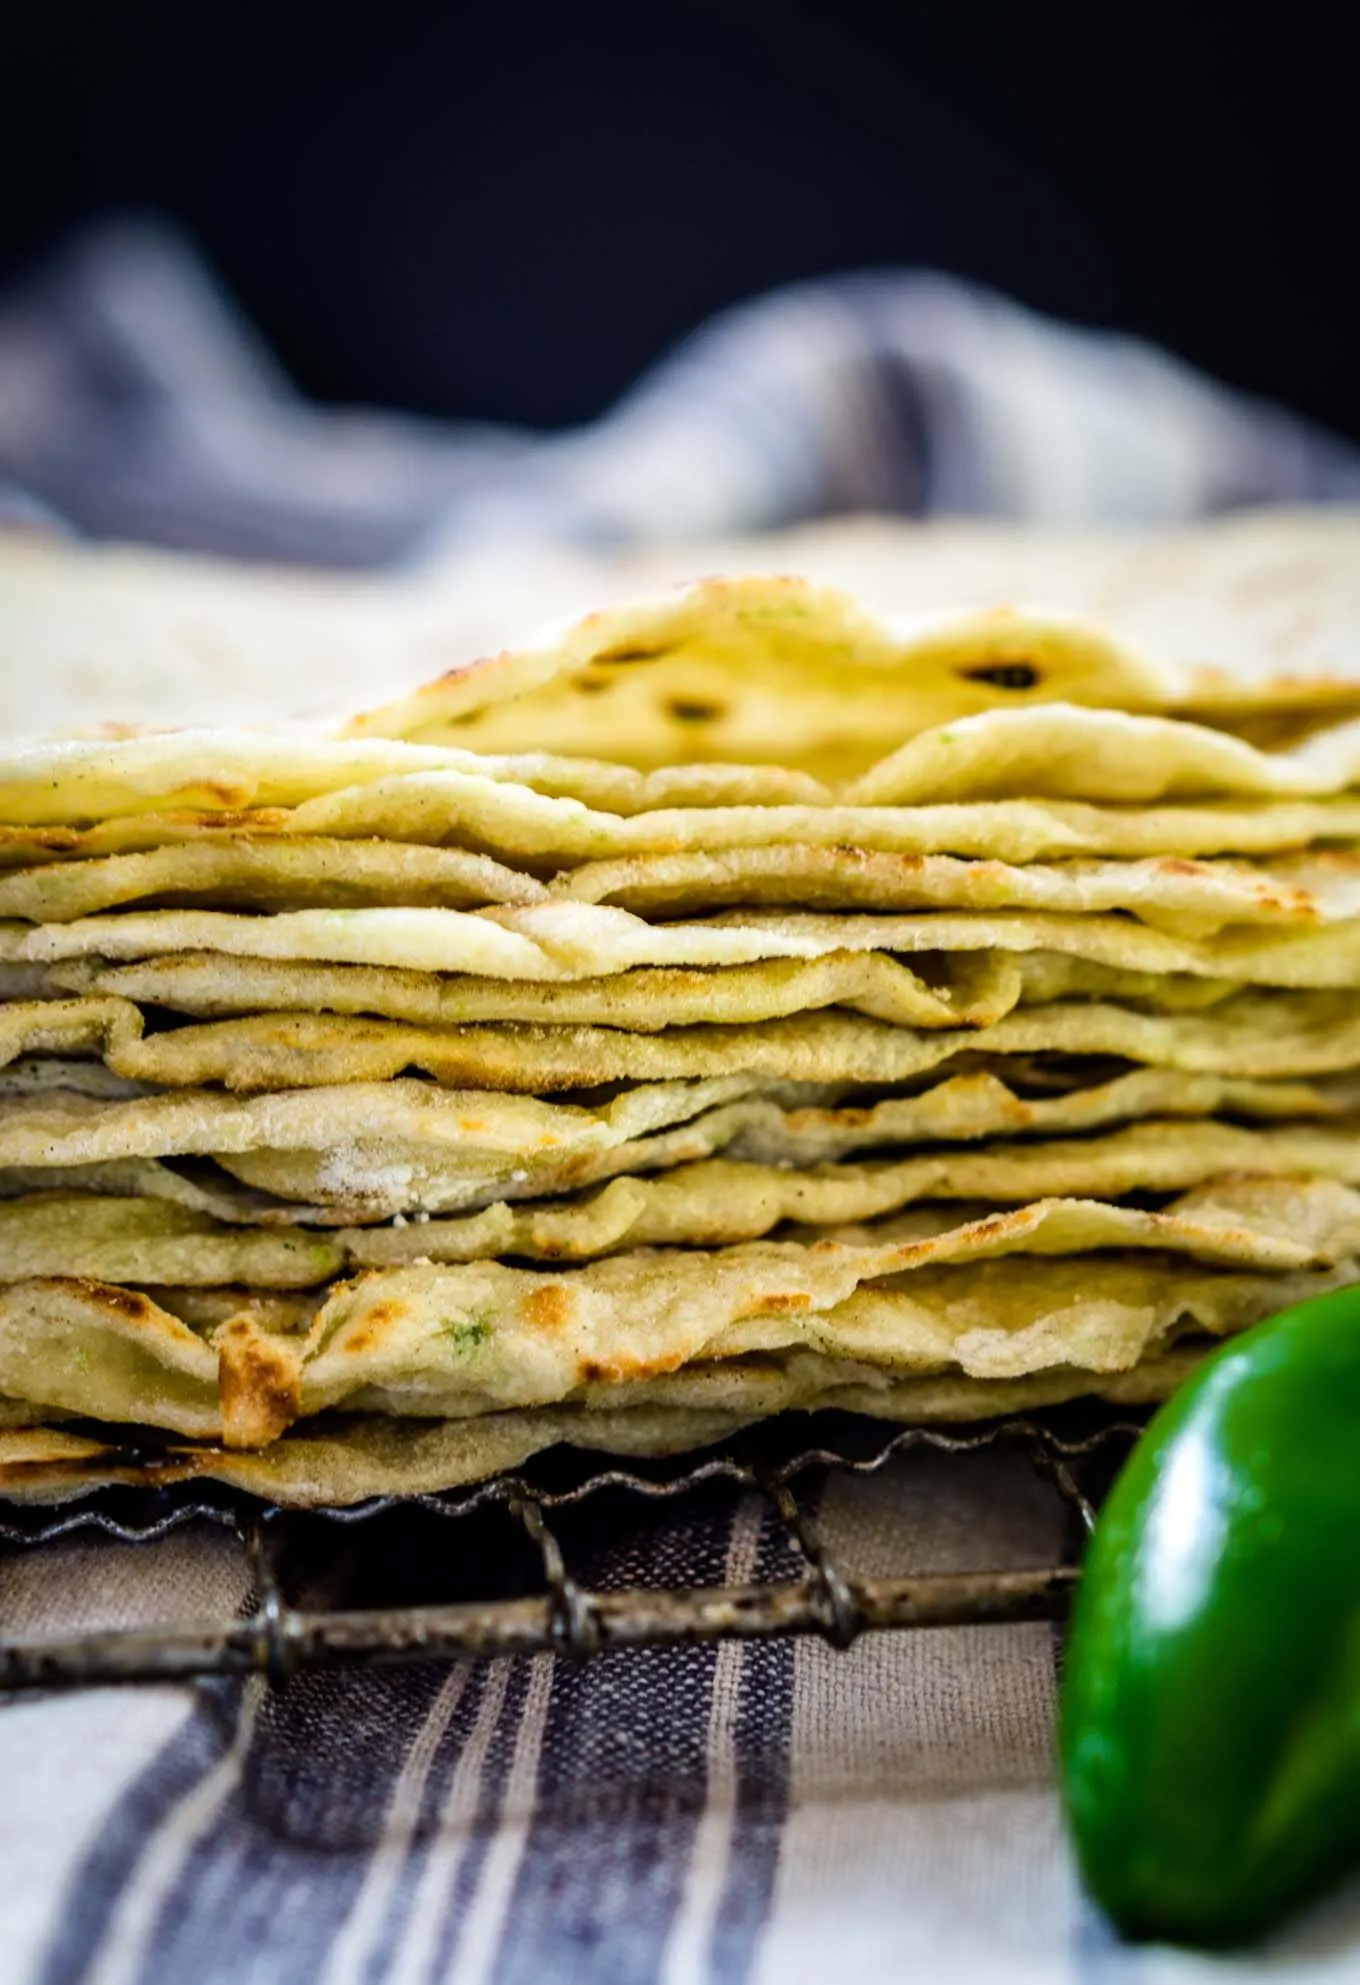 A stack of homemade tortilla shells on a cooling rack. A fresh jalapeno sits in the front and a blue striped towel sits in the background.